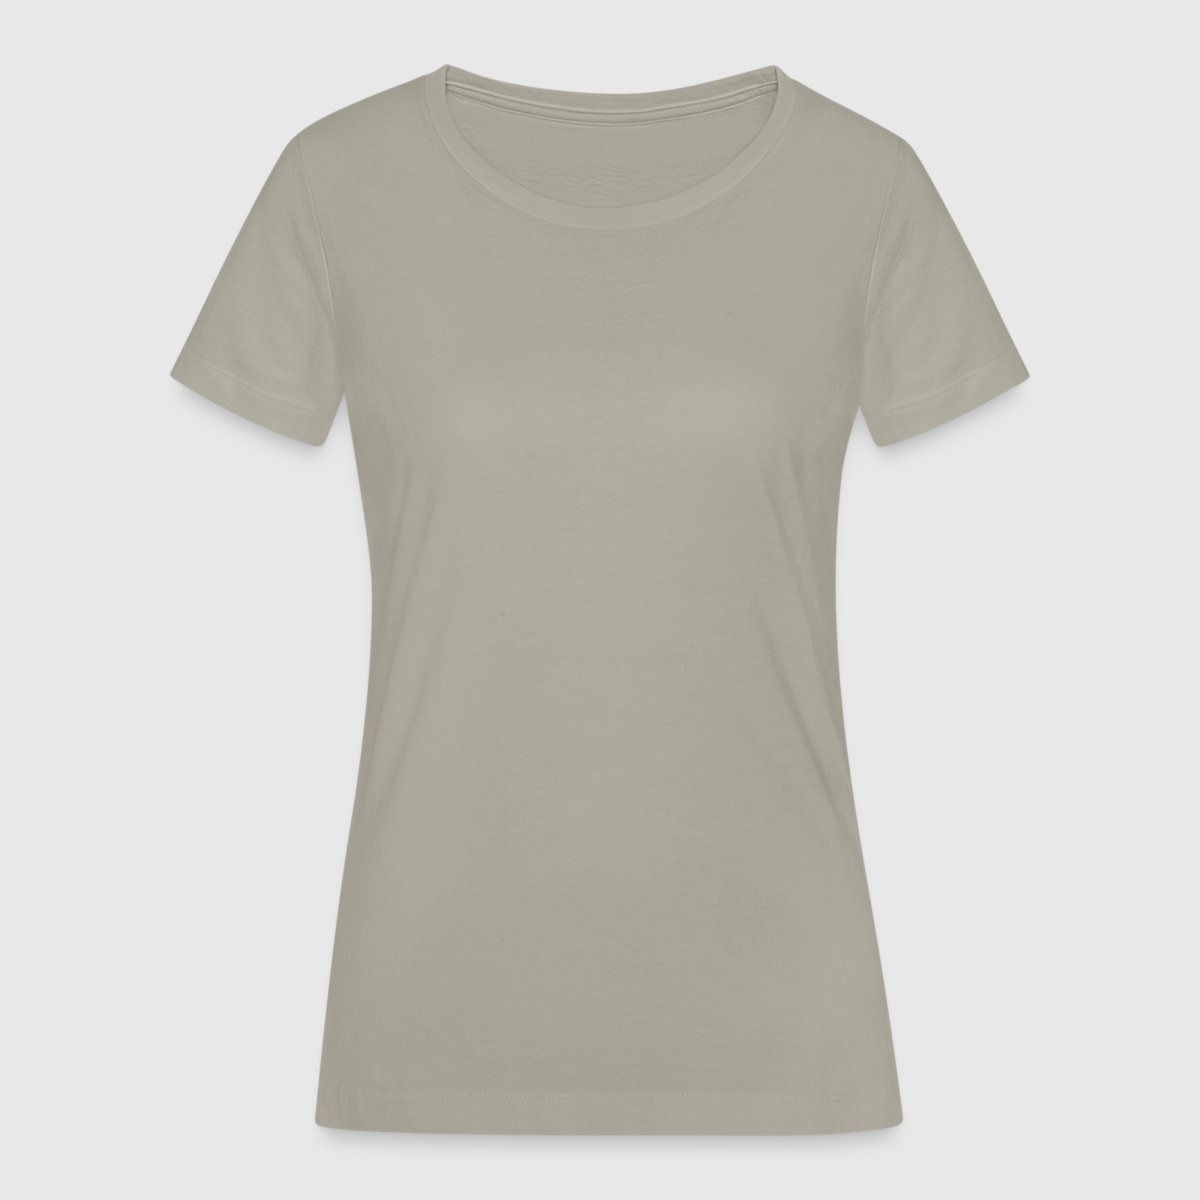 Women’s Organic T-Shirt by Russell Pure Organic - Front